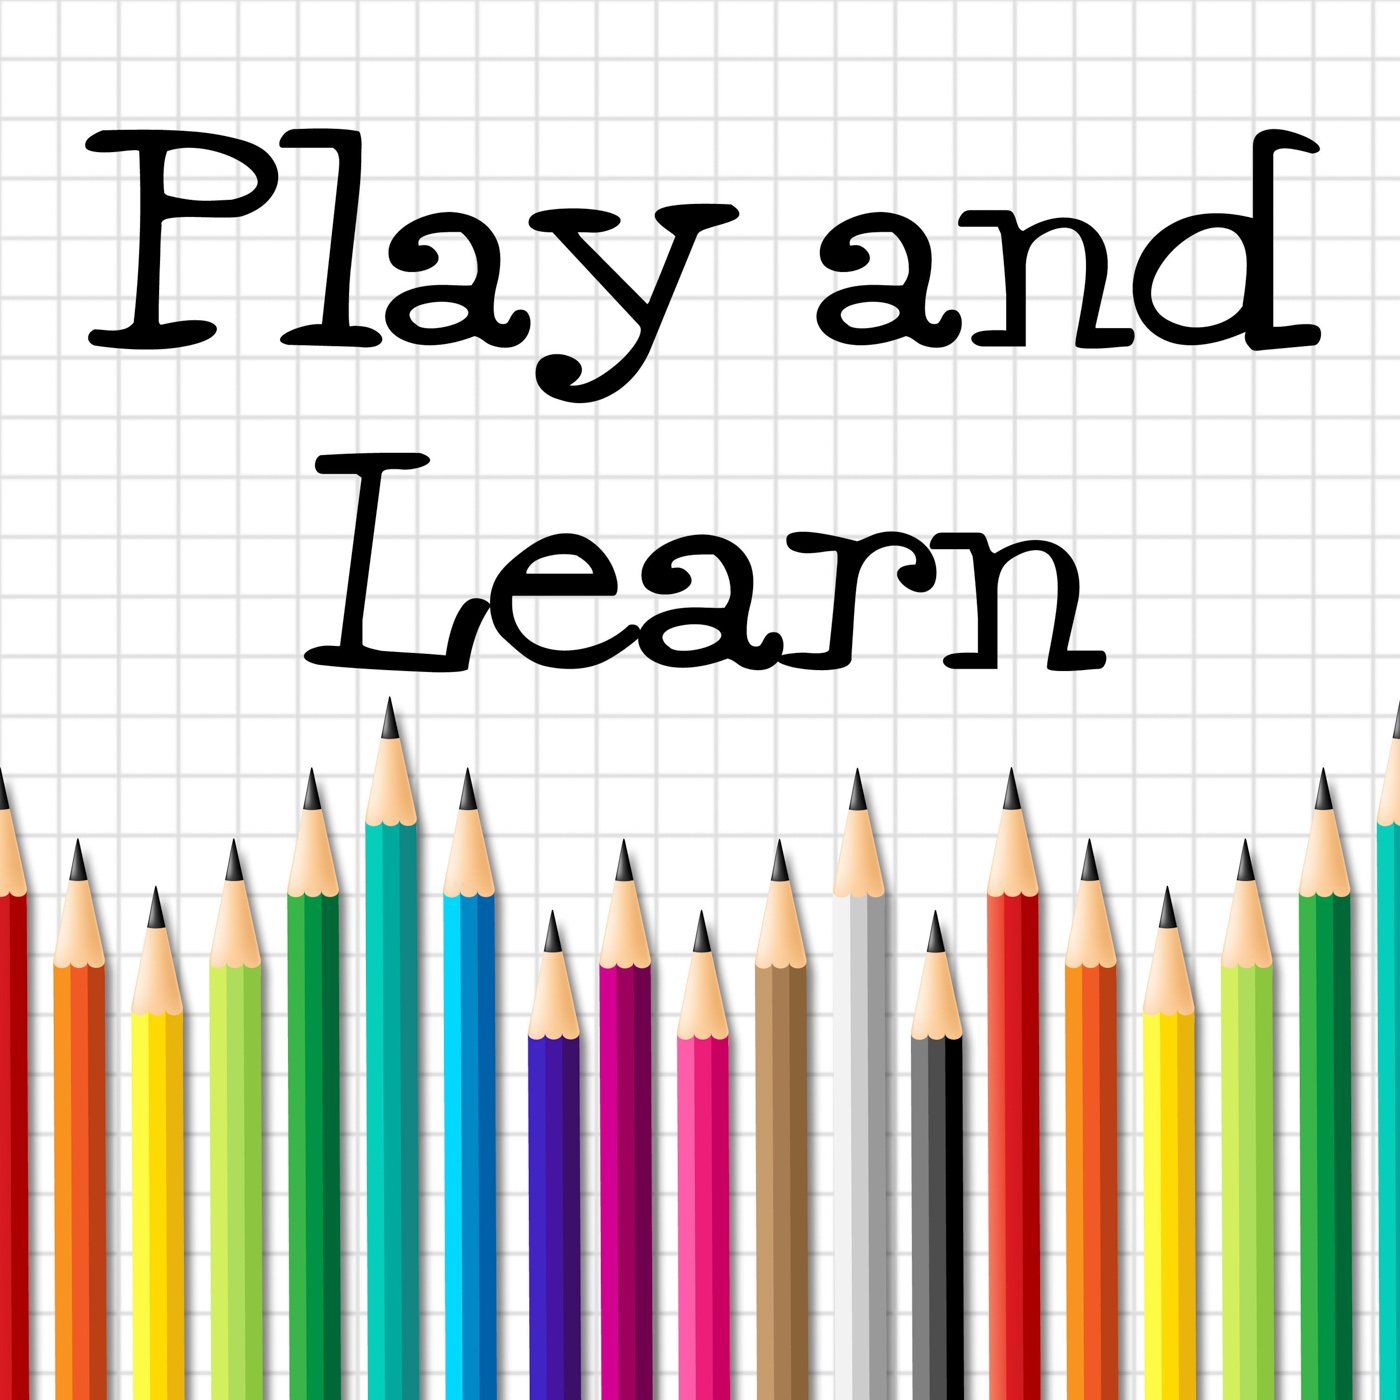 Play and learn shows free time and tutoring photo